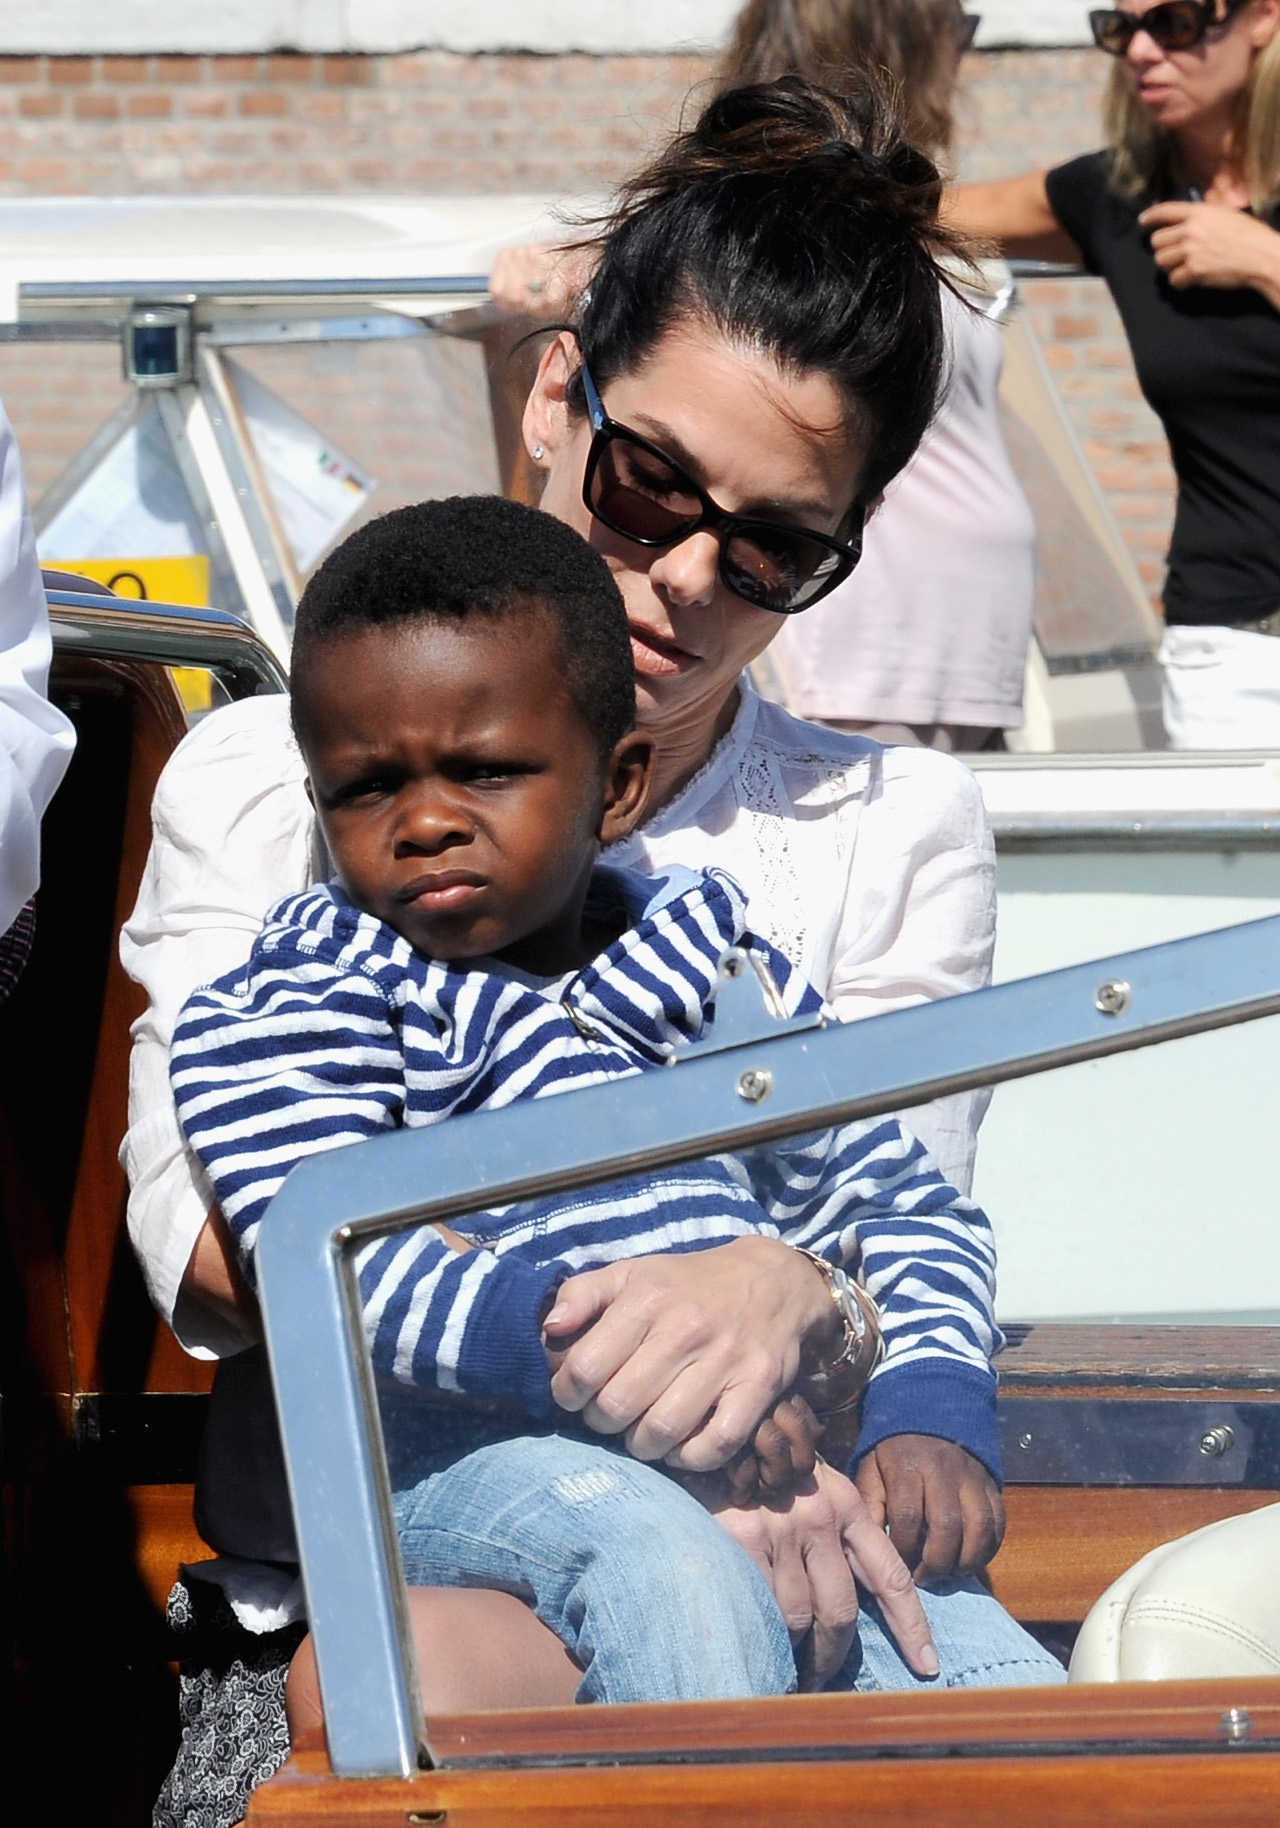 Actress Sandra Bullock and her son Louis Bullock pictured during the 70th Venice International Film Festival on August 27, 2013 in Venice, Italy | Source: Getty Images